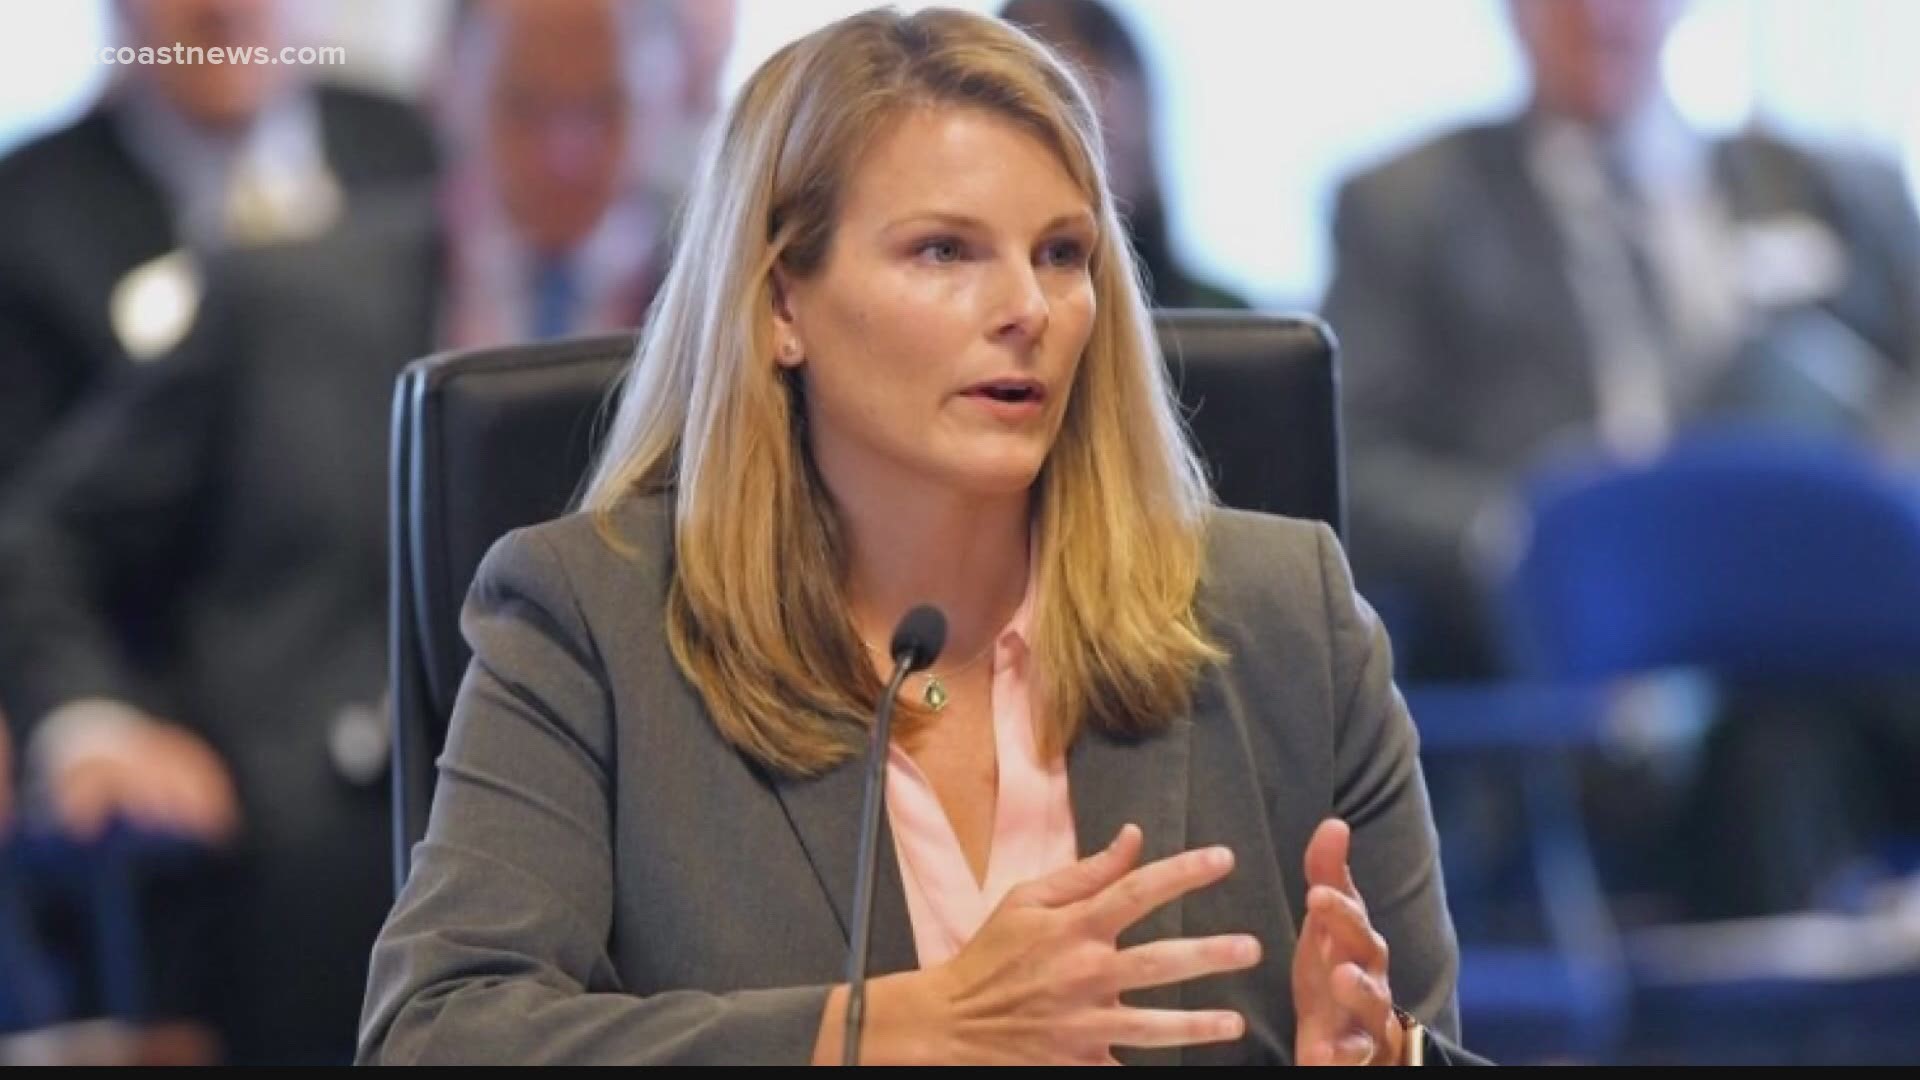 The new JEA board met Tuesday for the first time and voted to terminate interim CEO Melissa Dykes without cause.